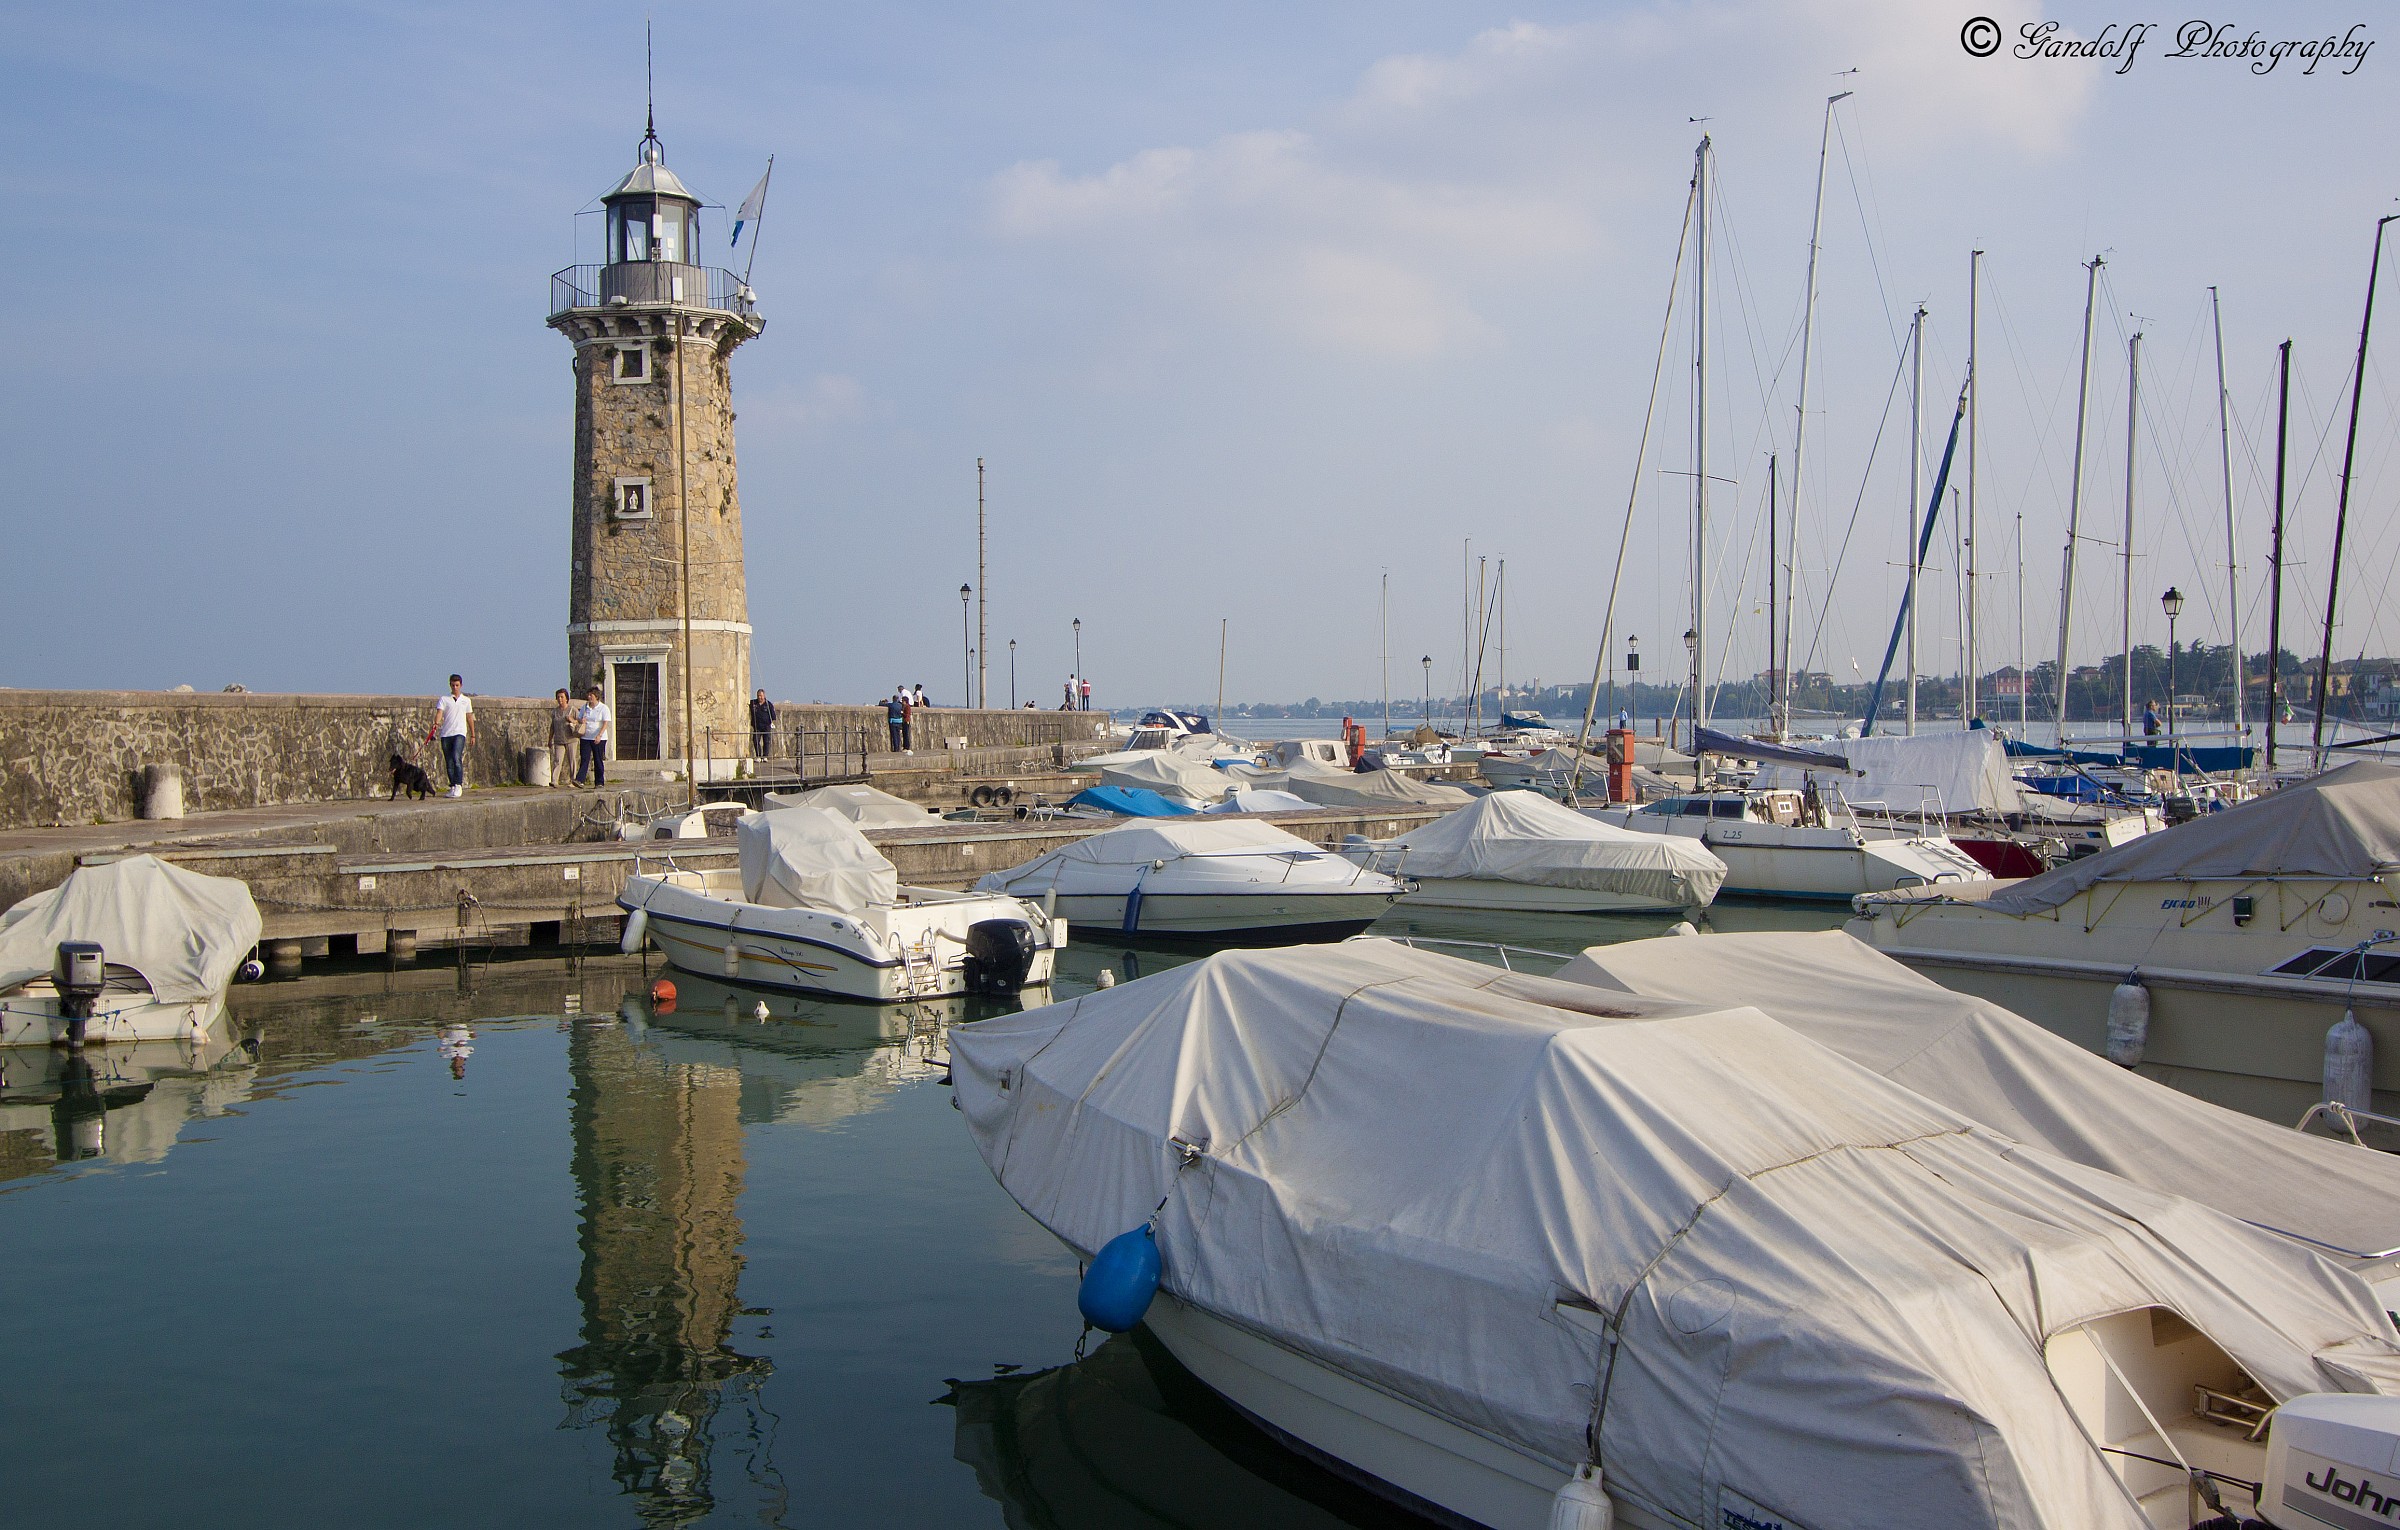 The lighthouse in Desenzano...